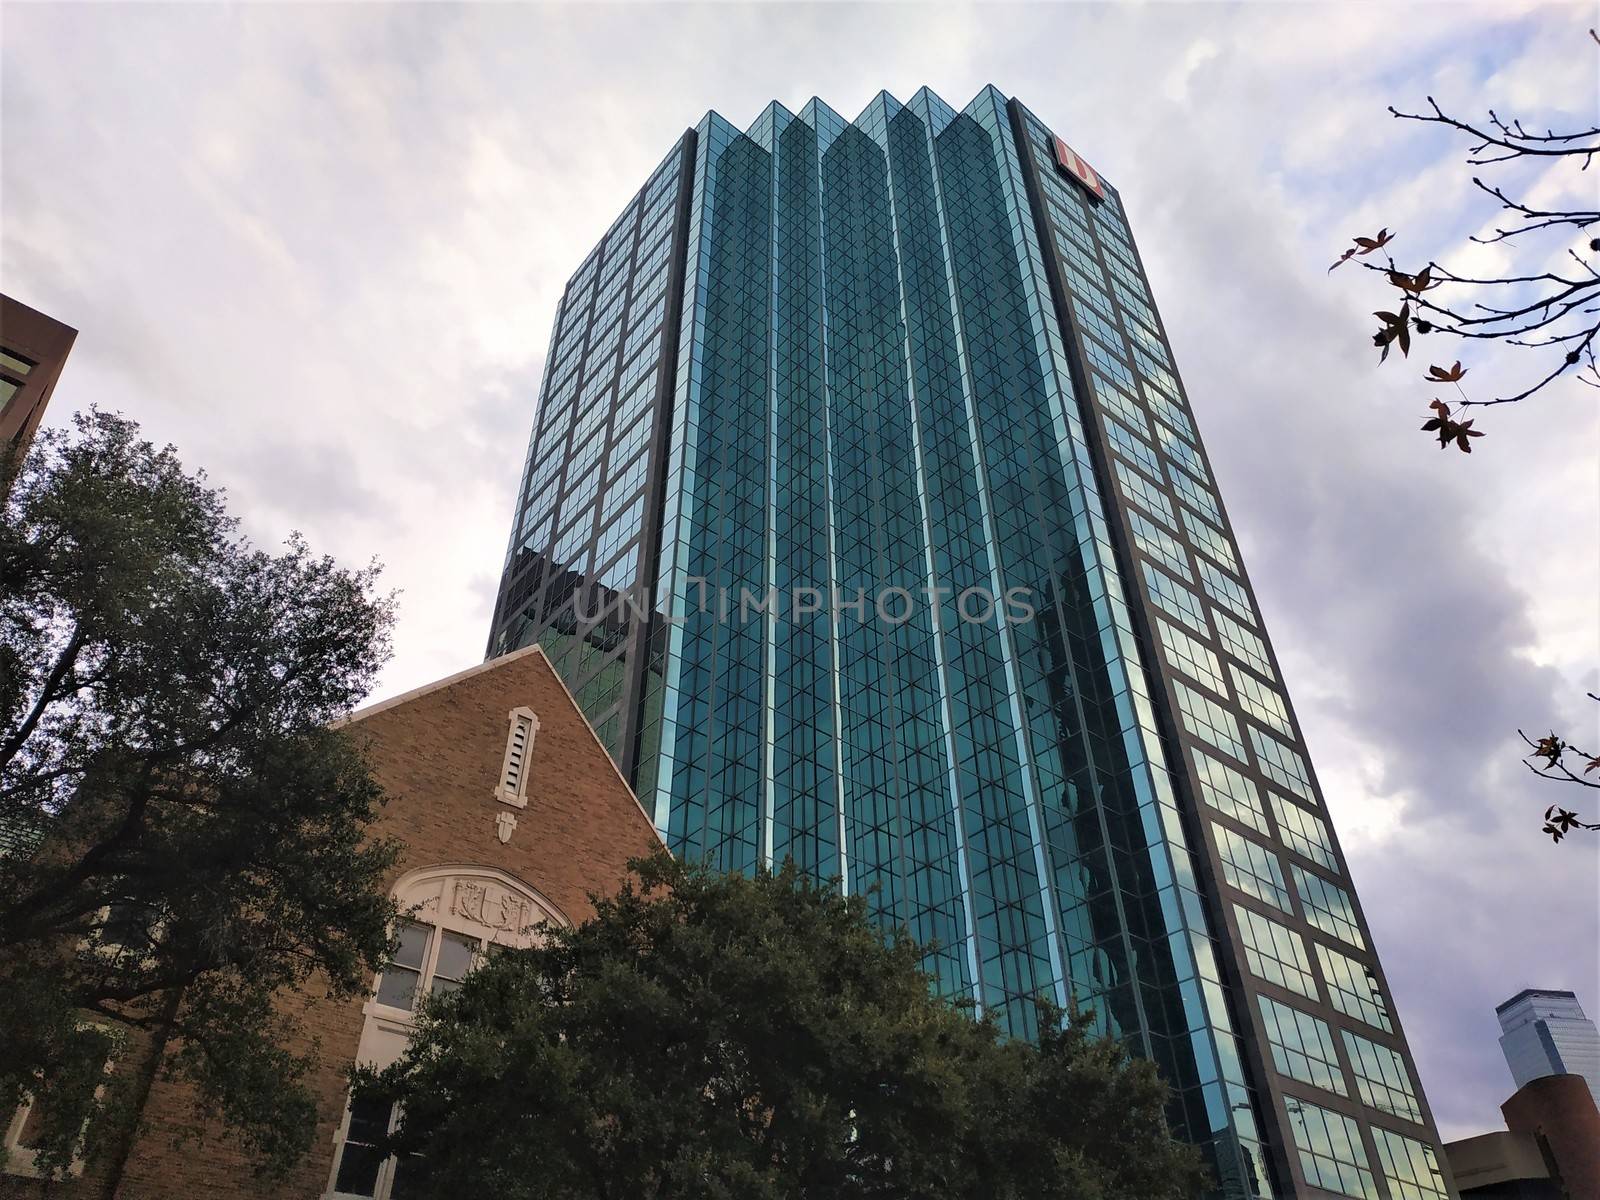 Skyscraper in downtown Dallas, Texas from worm's-eye view